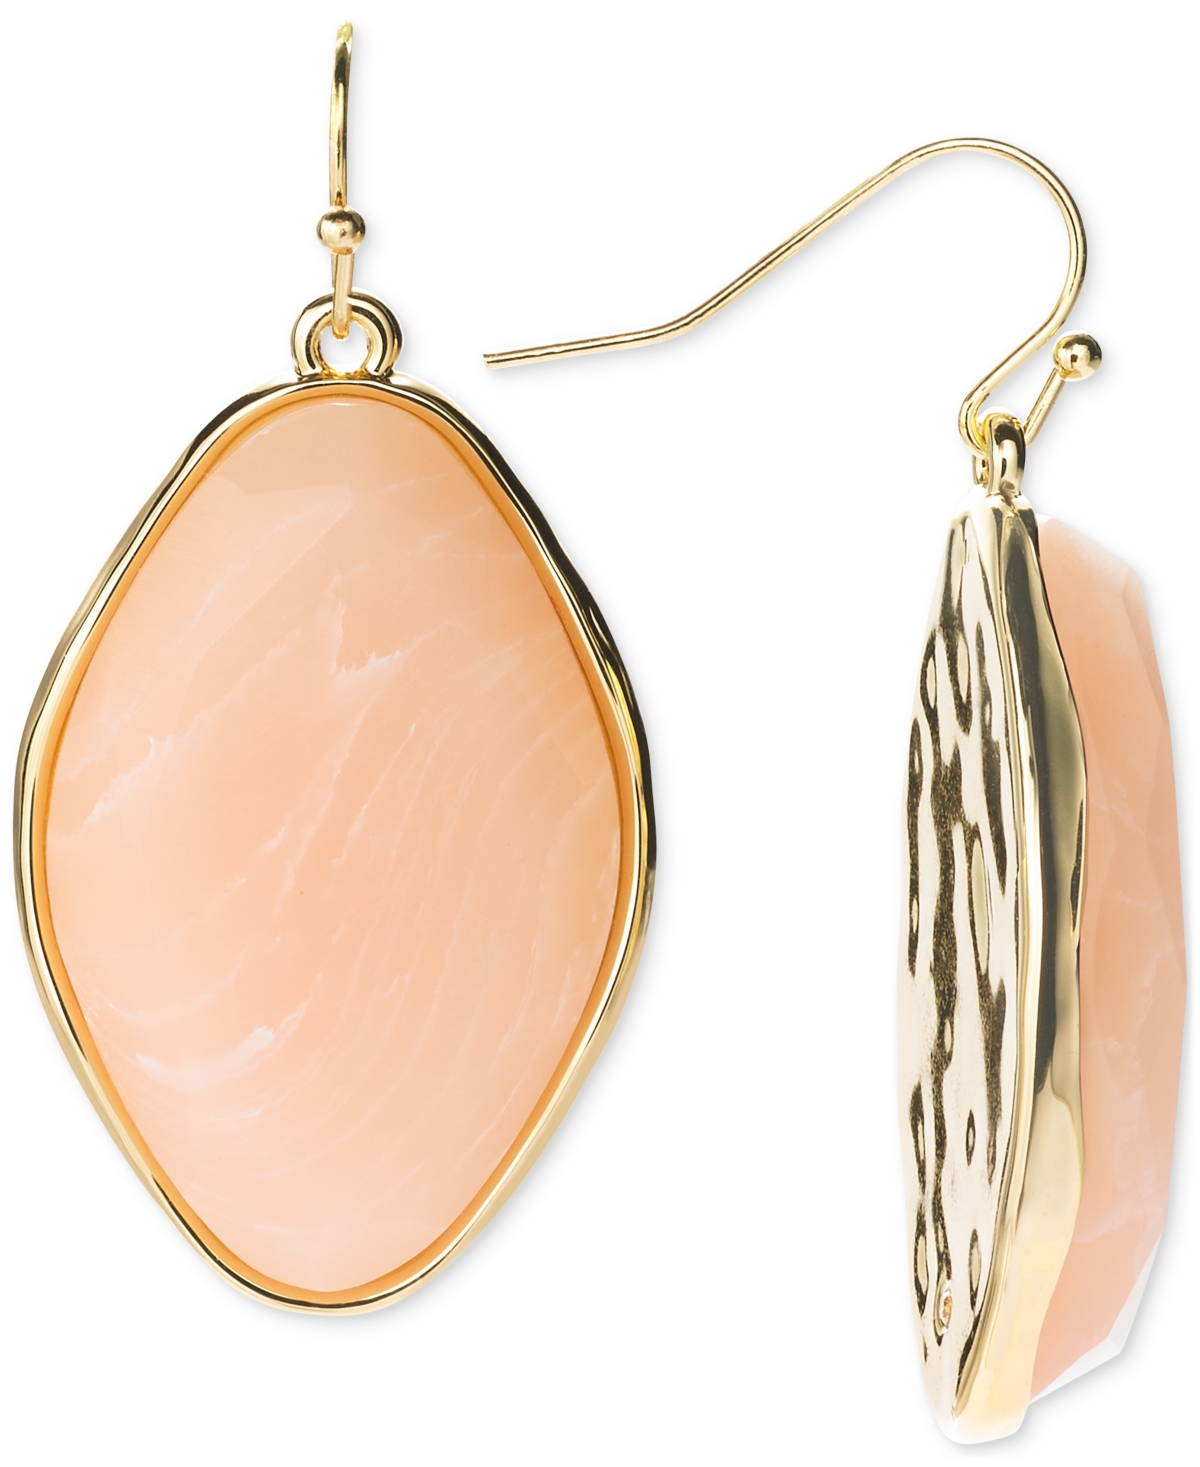 Gold-Tone Stone Hook Earrings, Created for Macy's - Pink